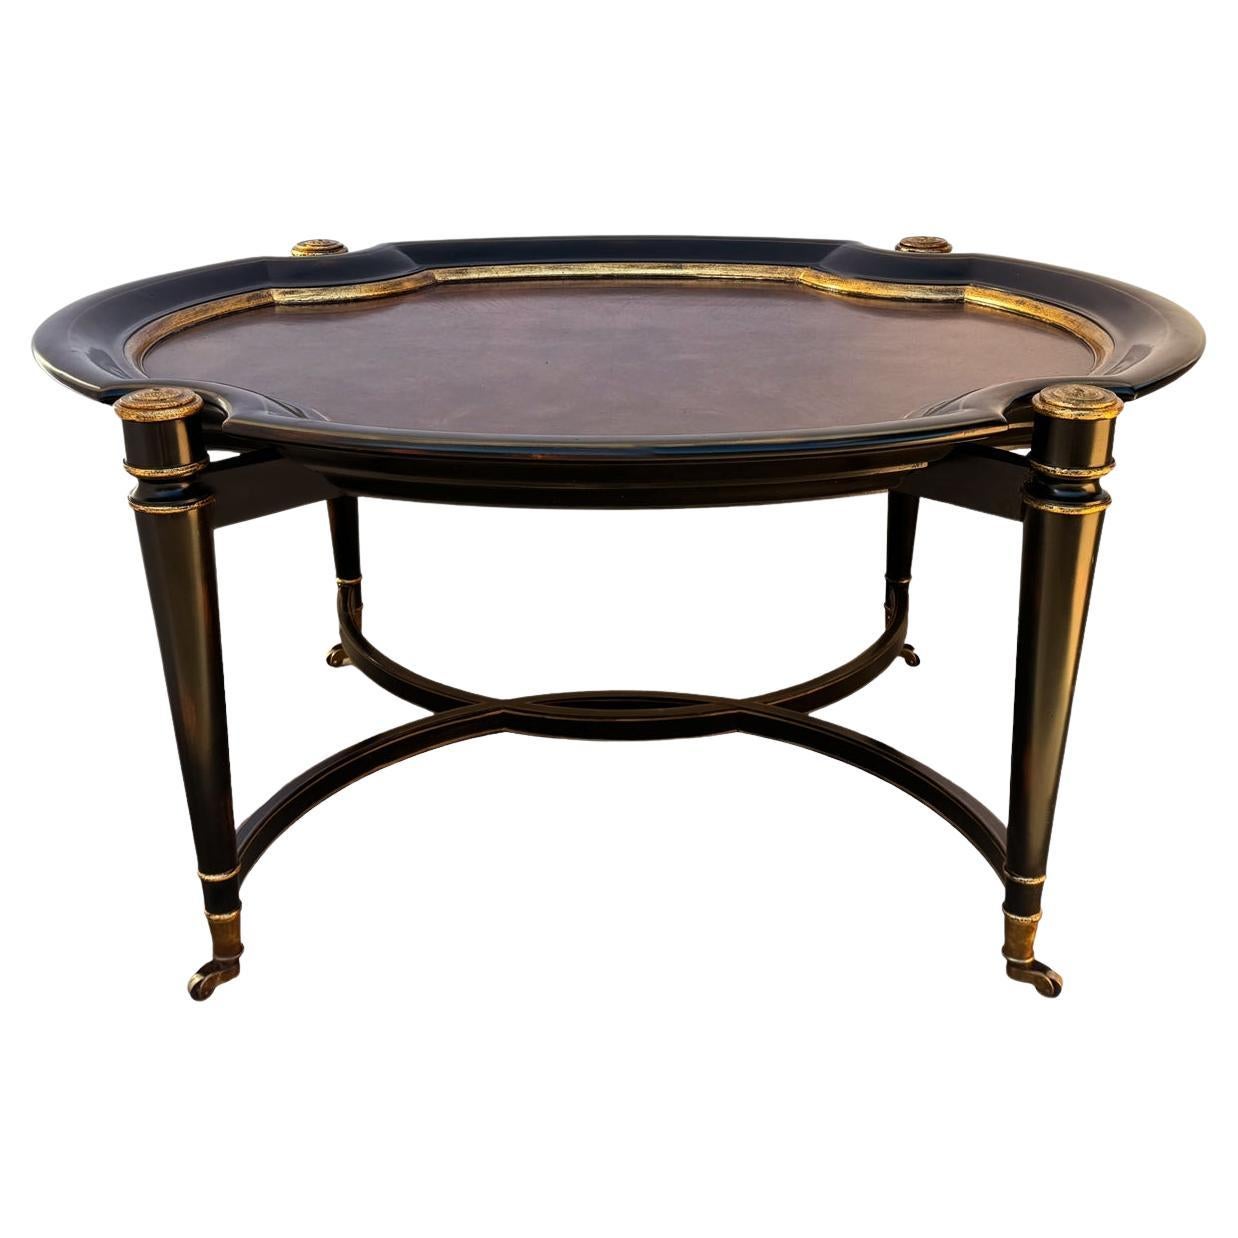 Hollywood Regency Burl Wood with Gold Trim Oval Cocktail Table by Maitland Smith For Sale